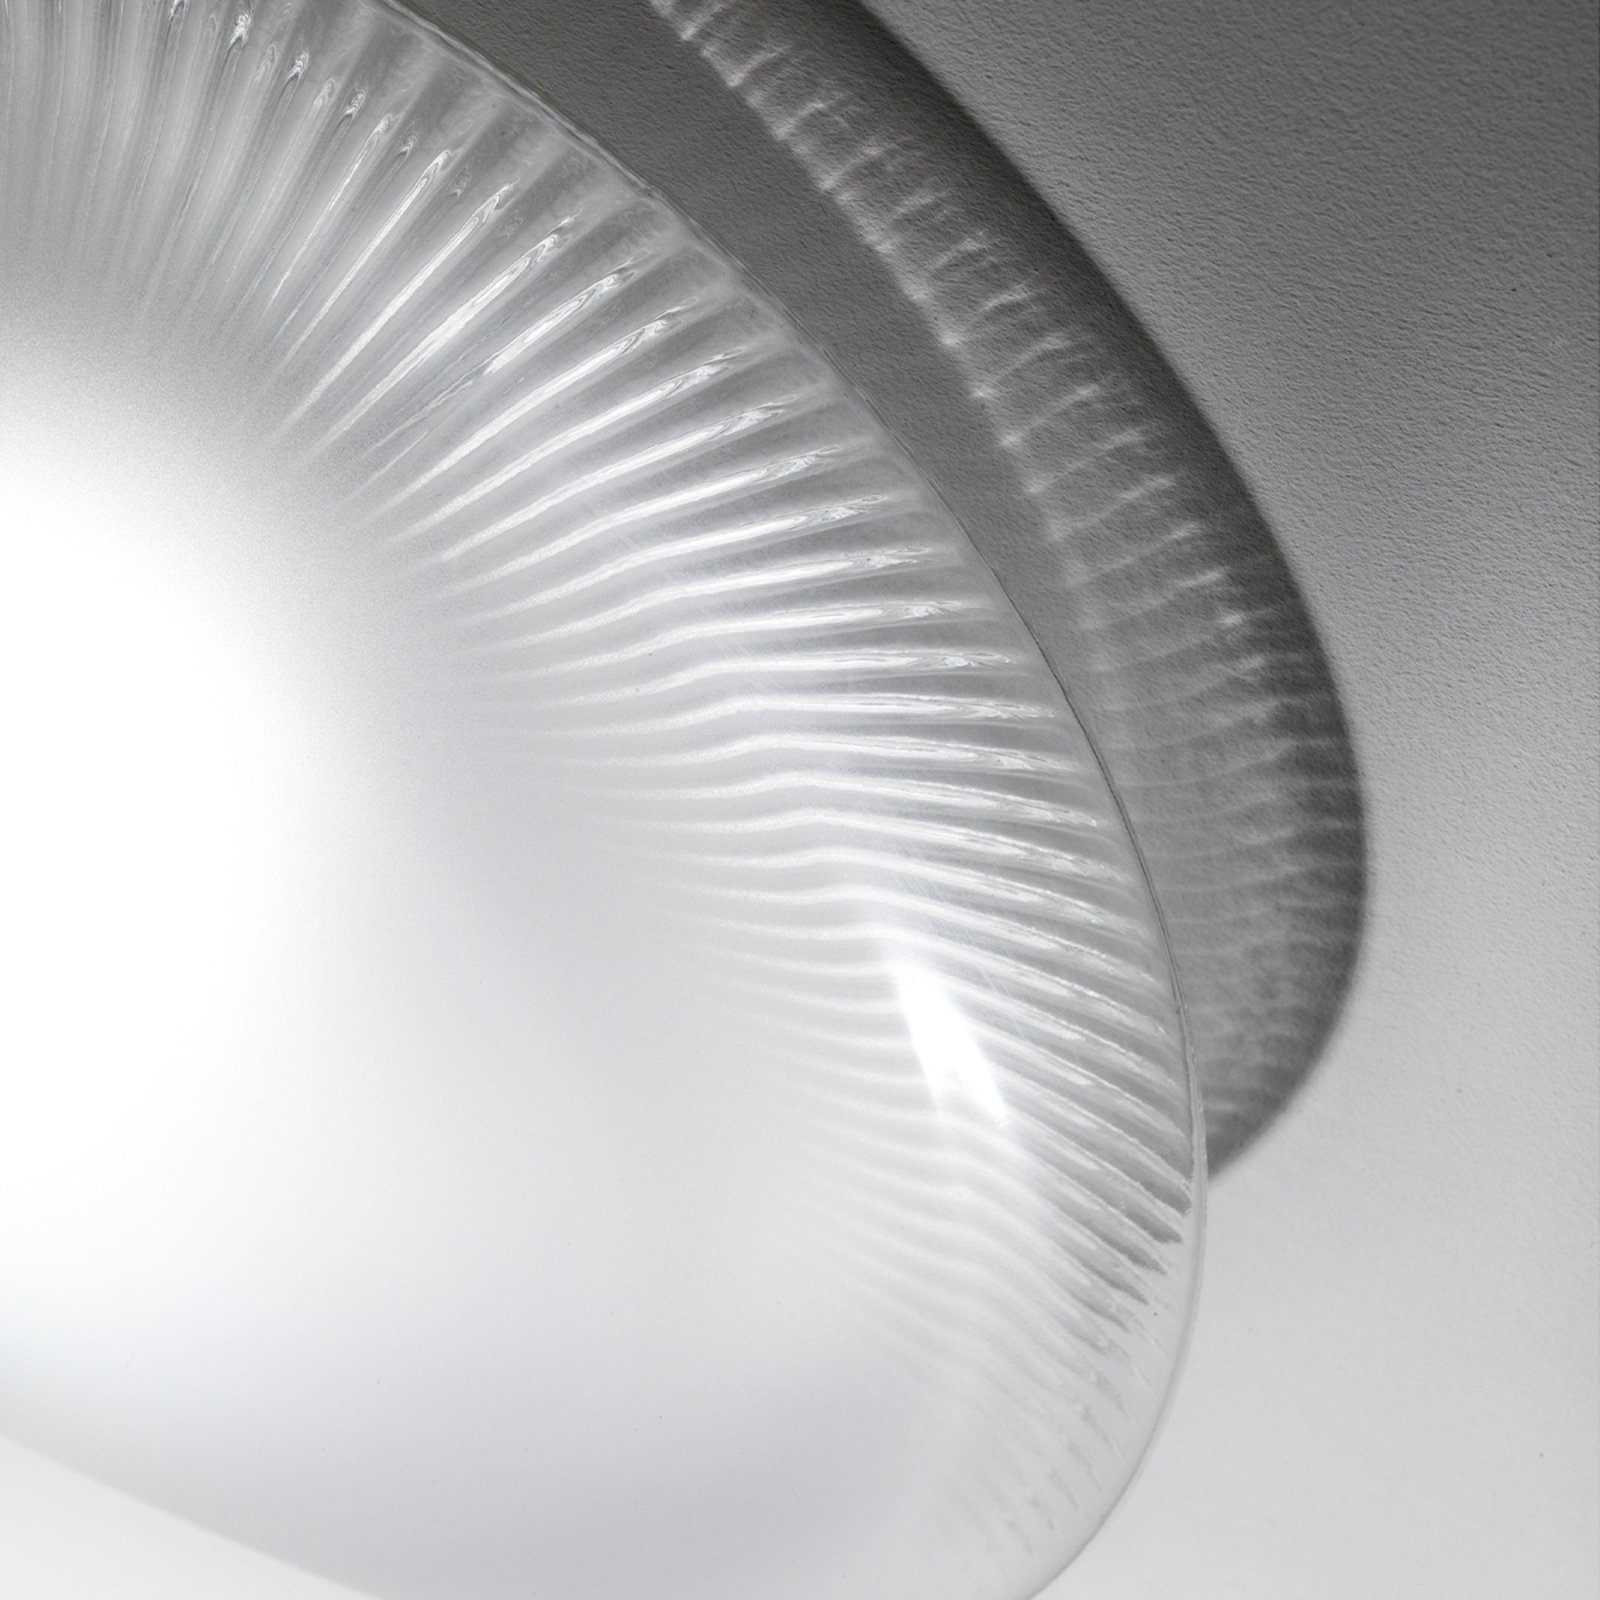 Powerful Loop glass ceiling light with LED 3000 K